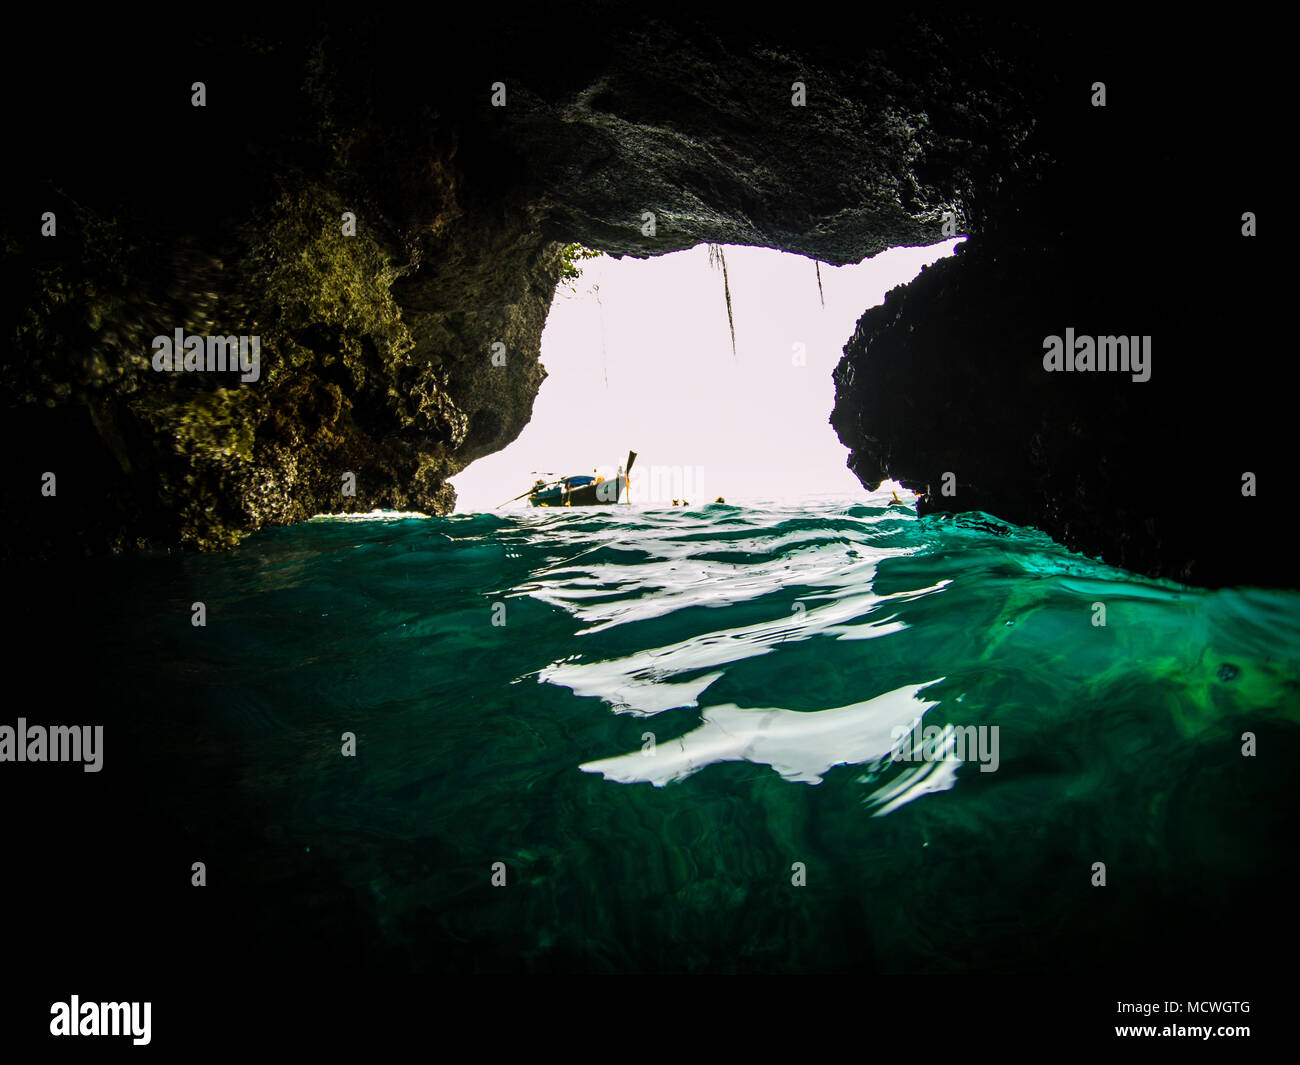 Action cam picture of the entrance of the Emerald cave (mokarot cave) in Ko Muk, Ko Lanta, Thailand. Stock Photo